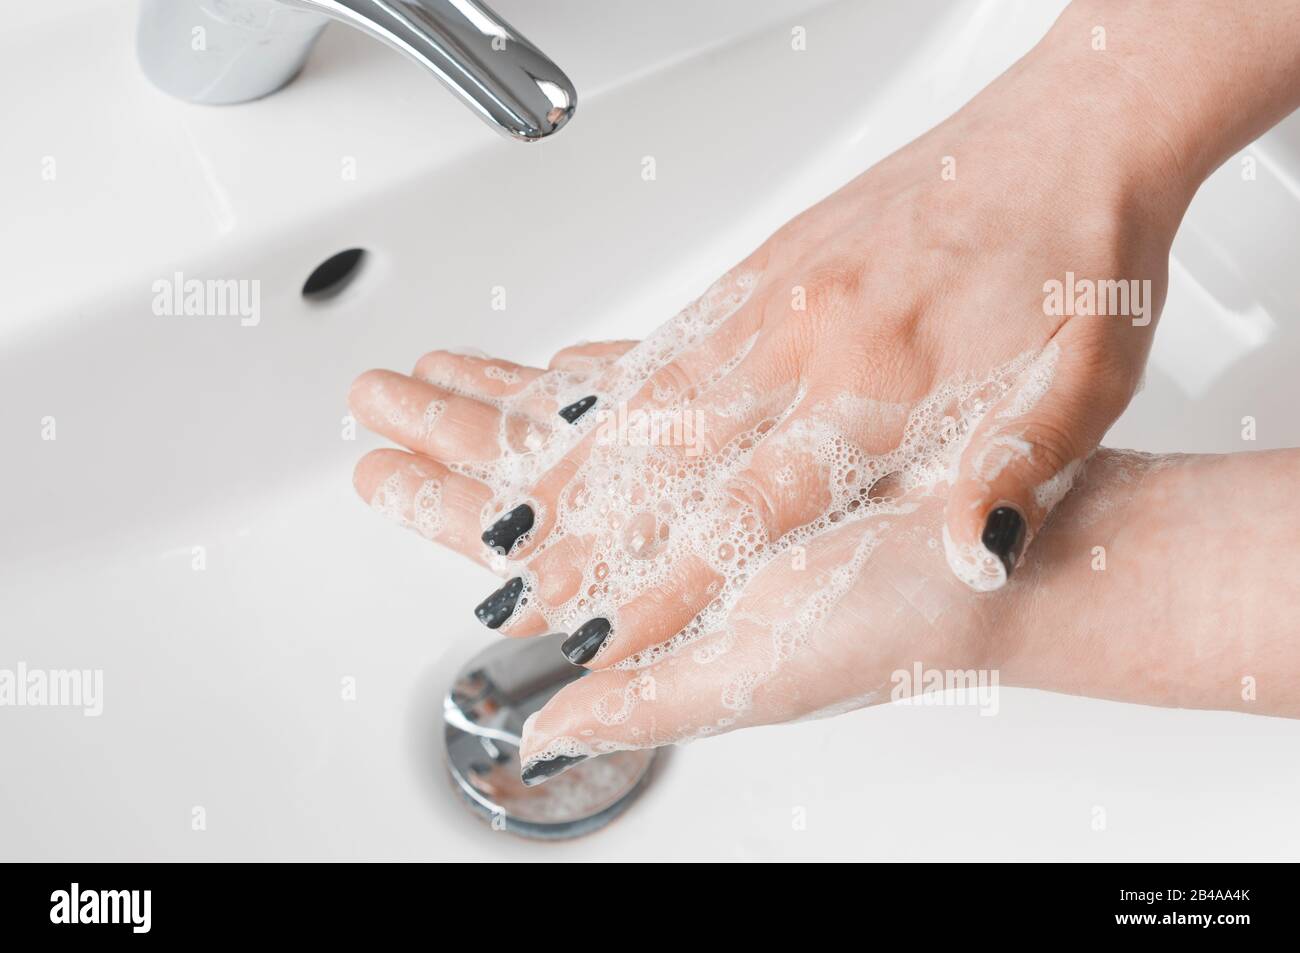 Effective handwashing techniques: woman wash her hands using palm to palm technique. Hand washing is very important to avoid the risk of contagion fro Stock Photo